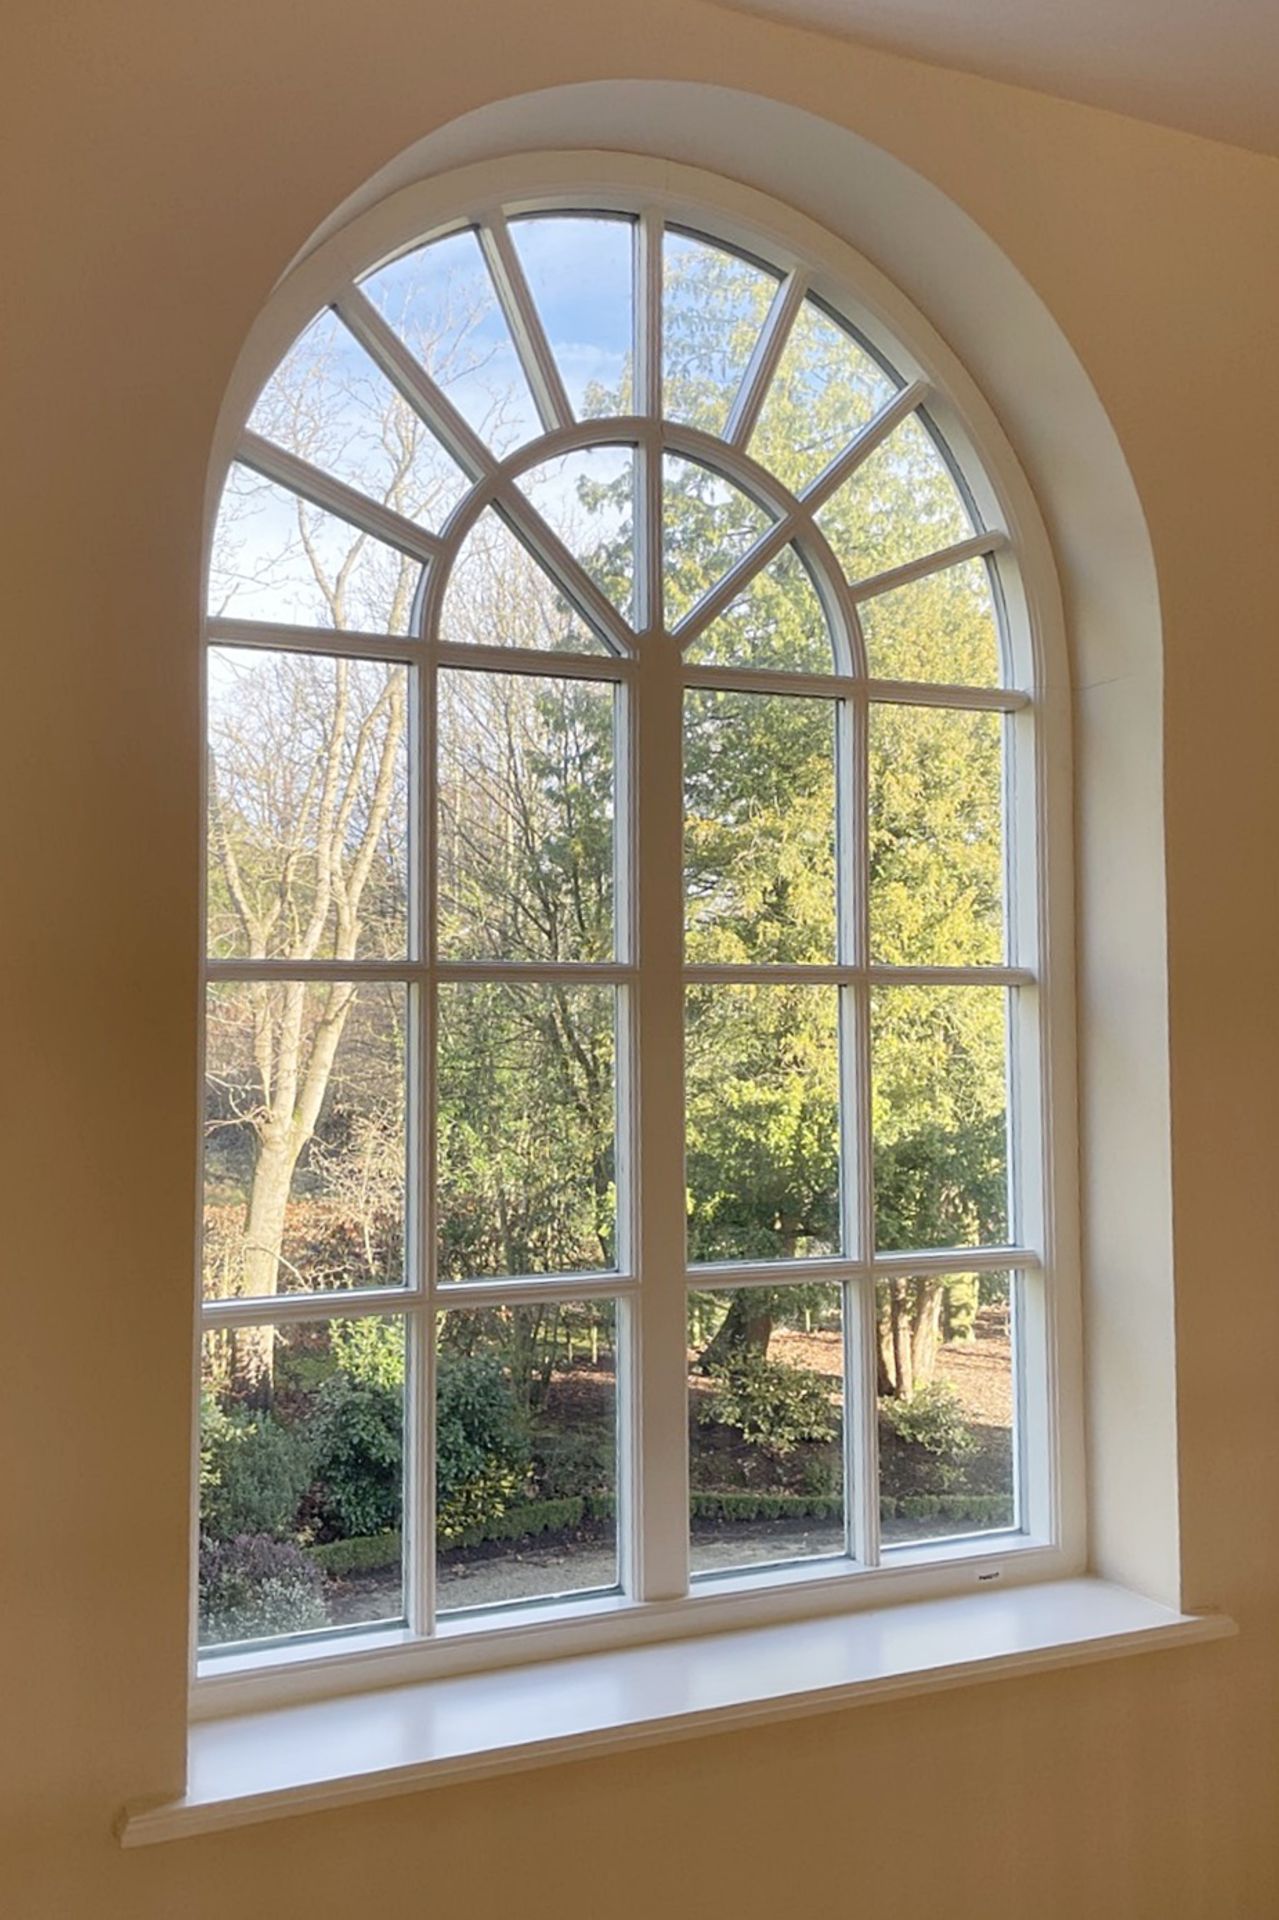 1 x Hardwood Timber Double Glazed Arch Window Frame - Ref: PAN217 / ARCH - CL896 - NO VAT - Image 18 of 24